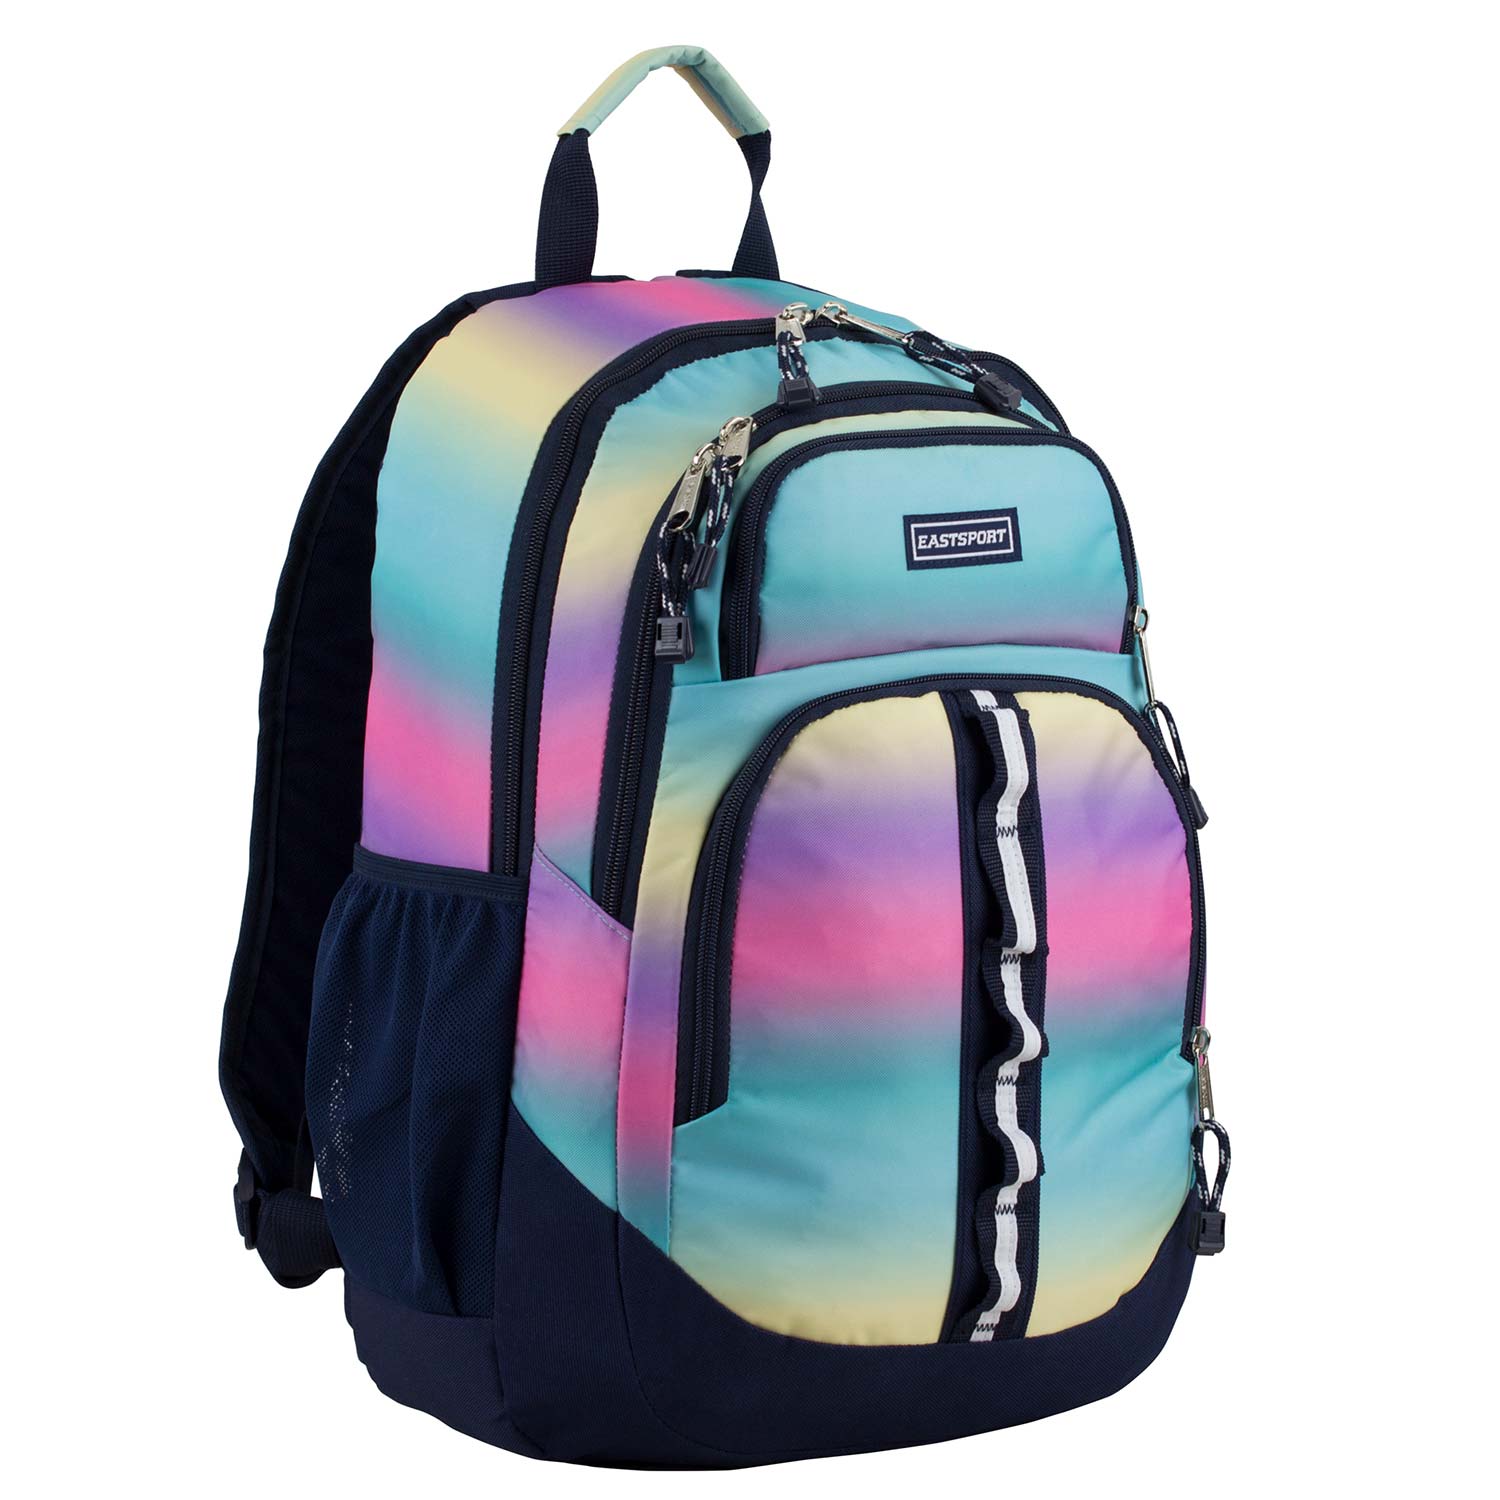 Eastsport Rally Sport Backpack in Ombre